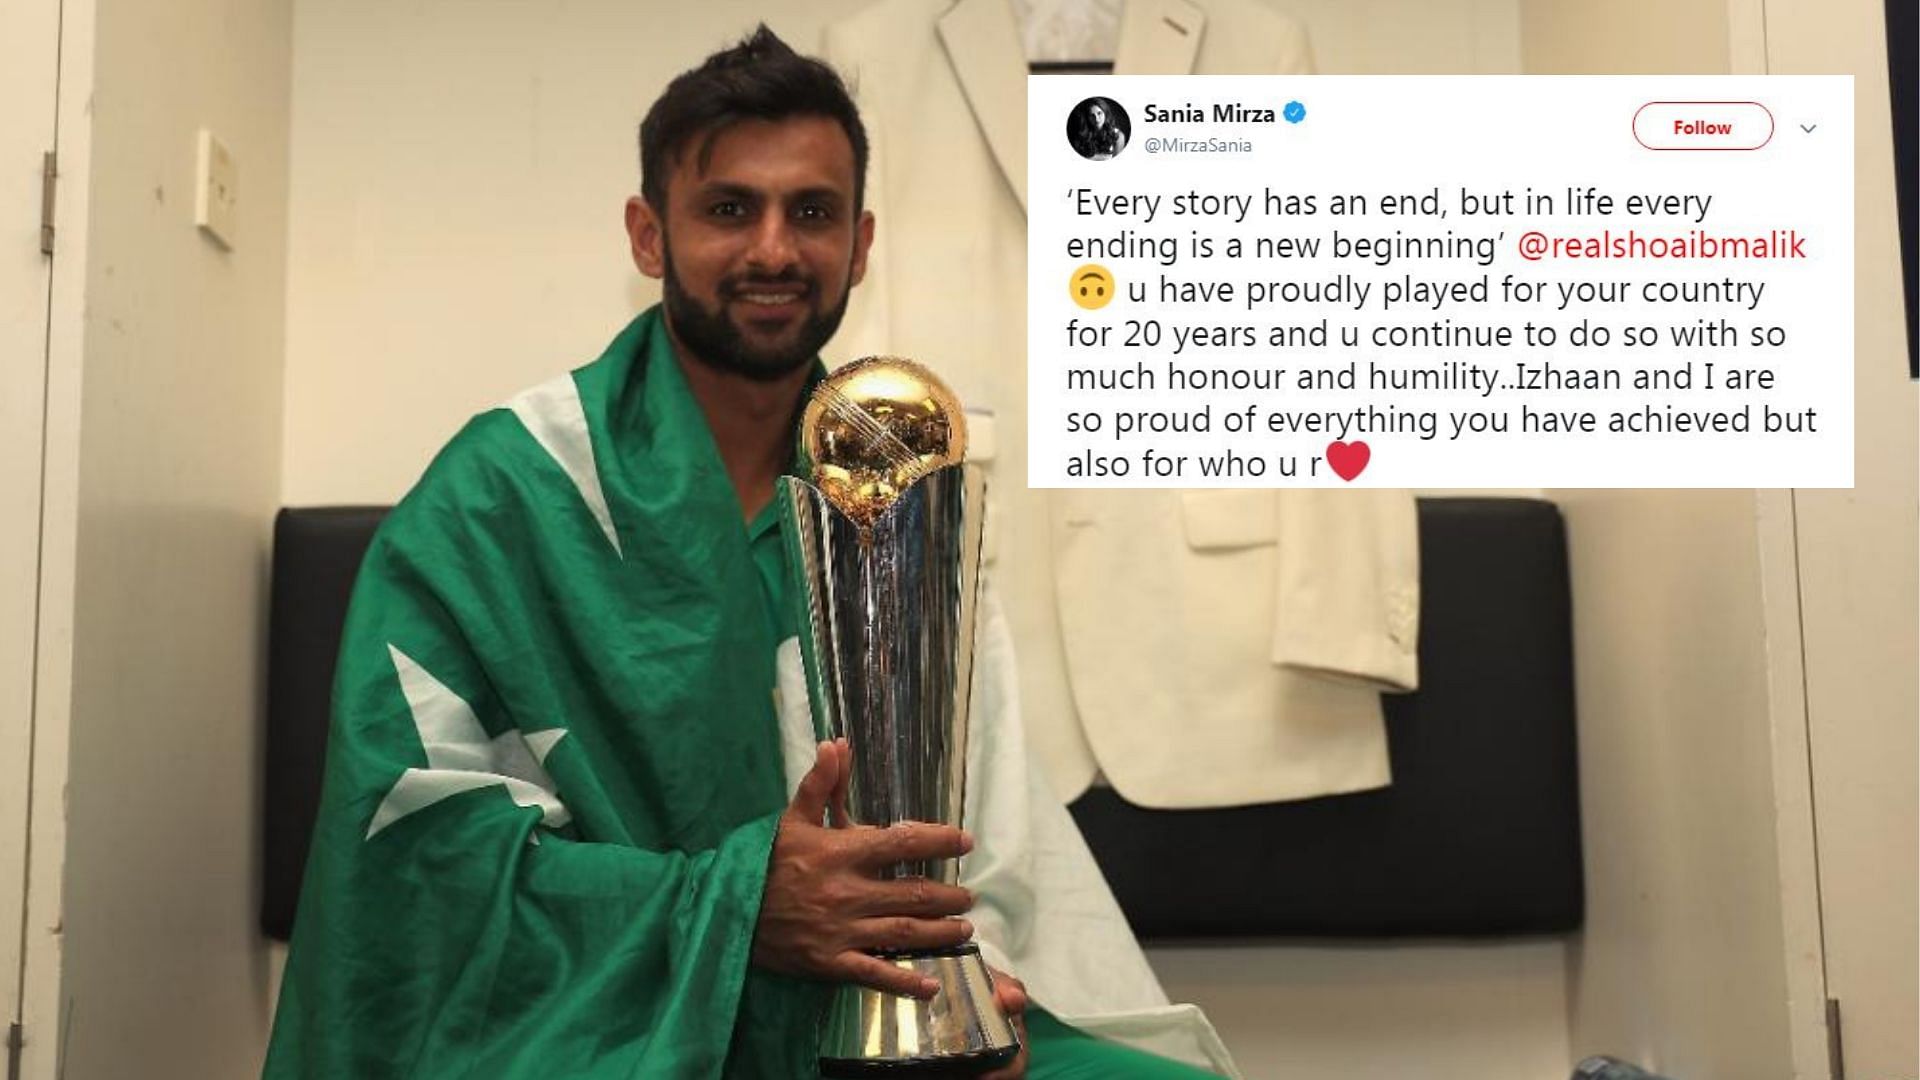  Sania Mirza in a post dedicated to Shoaib Malik said that she is proud of everything he has have achieved in a career spanning 20 years.